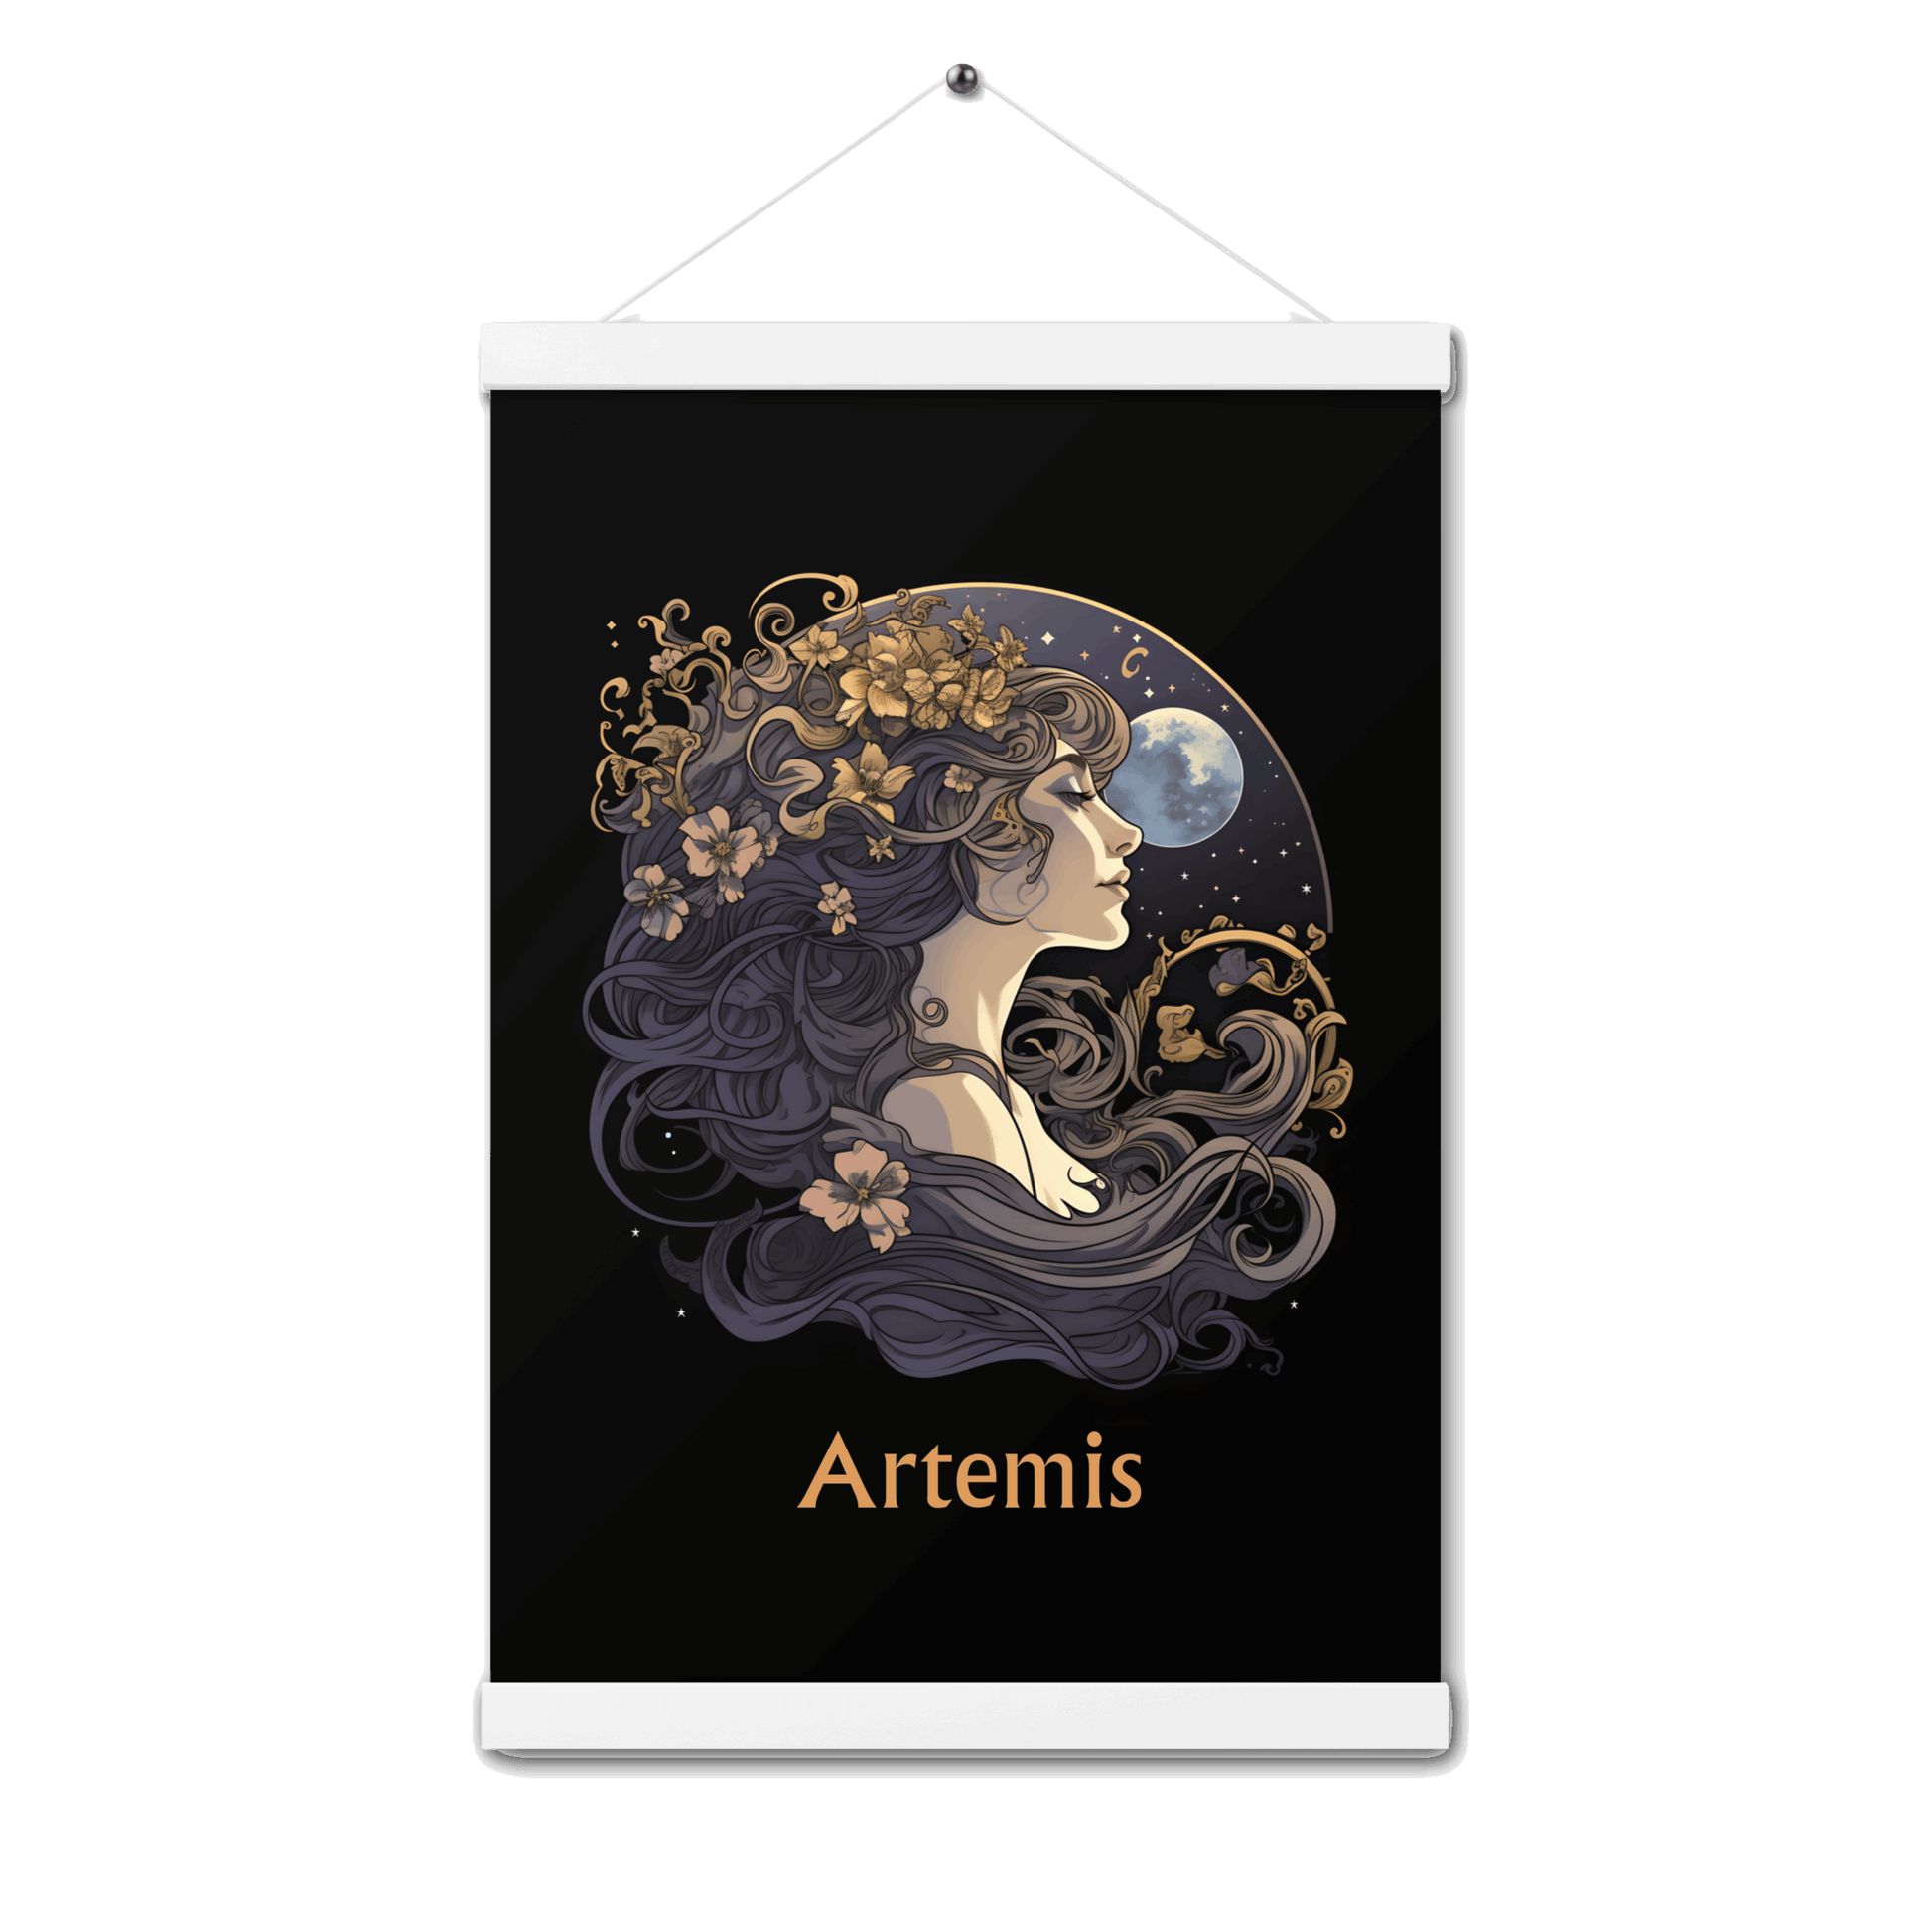 Artemis' Perception - Colorful Hanging Wall Art High Quality Matte Poster DrawDadDraw